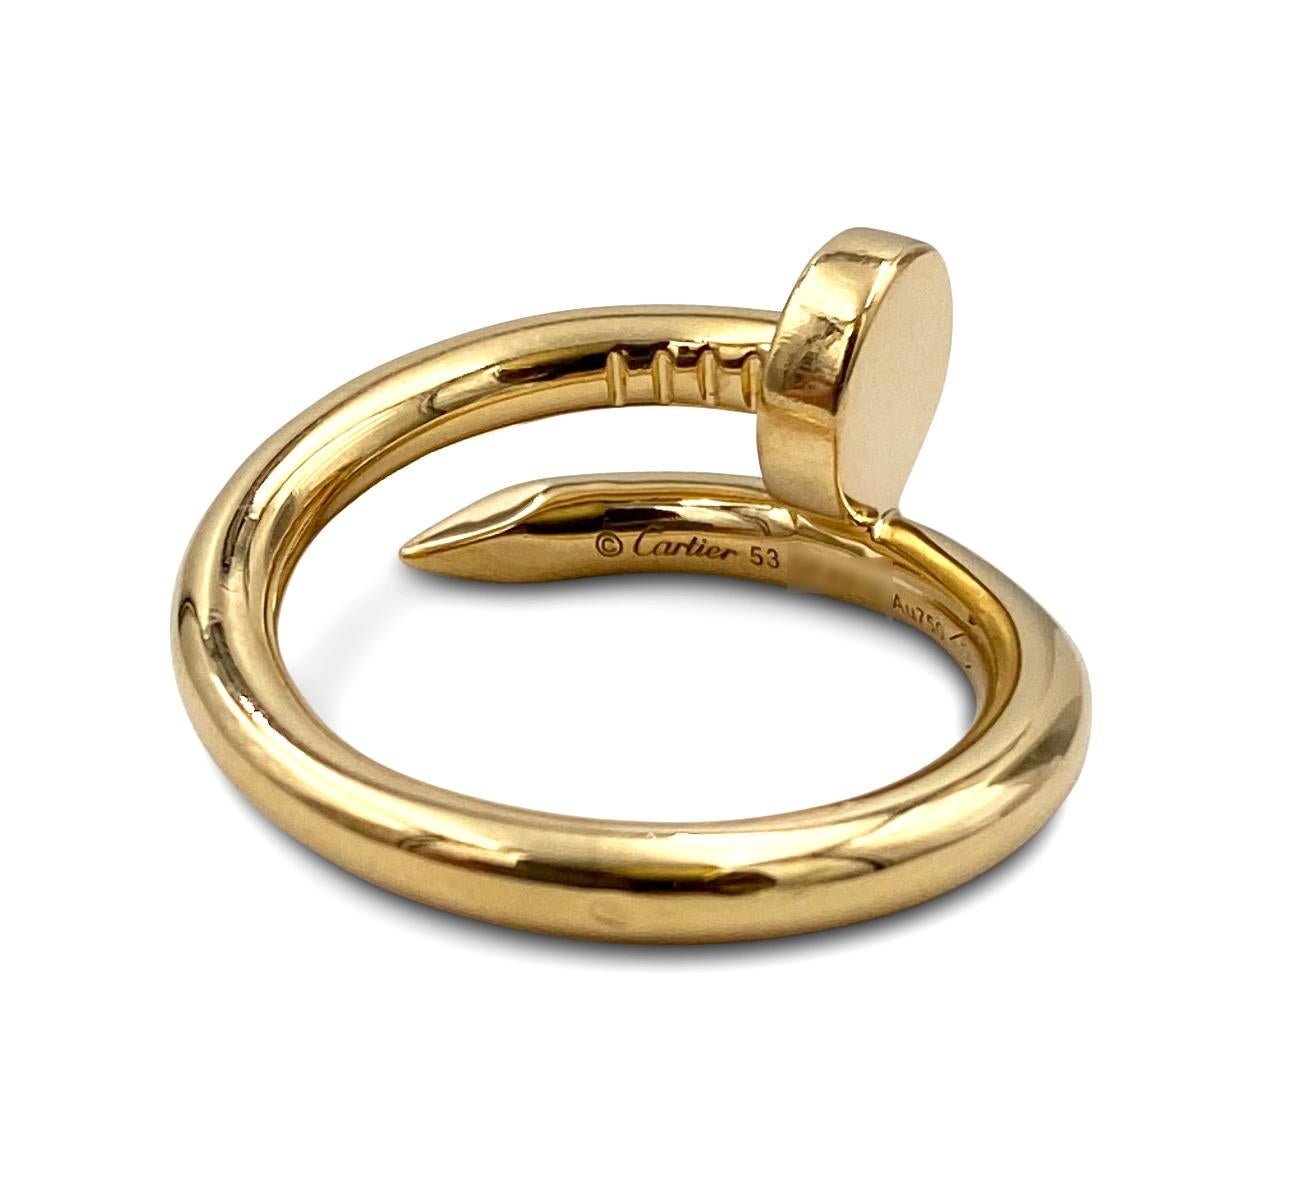 Designed as a 'just a nail', this authentic Cartier 'Juste un Clou' ring is modern, transcending the every day, yet bold. The nail ring is an innovative twist on a familiar and ordinary object. Signed Cartier, 53, Au750. Ring is 2.65m in width and a